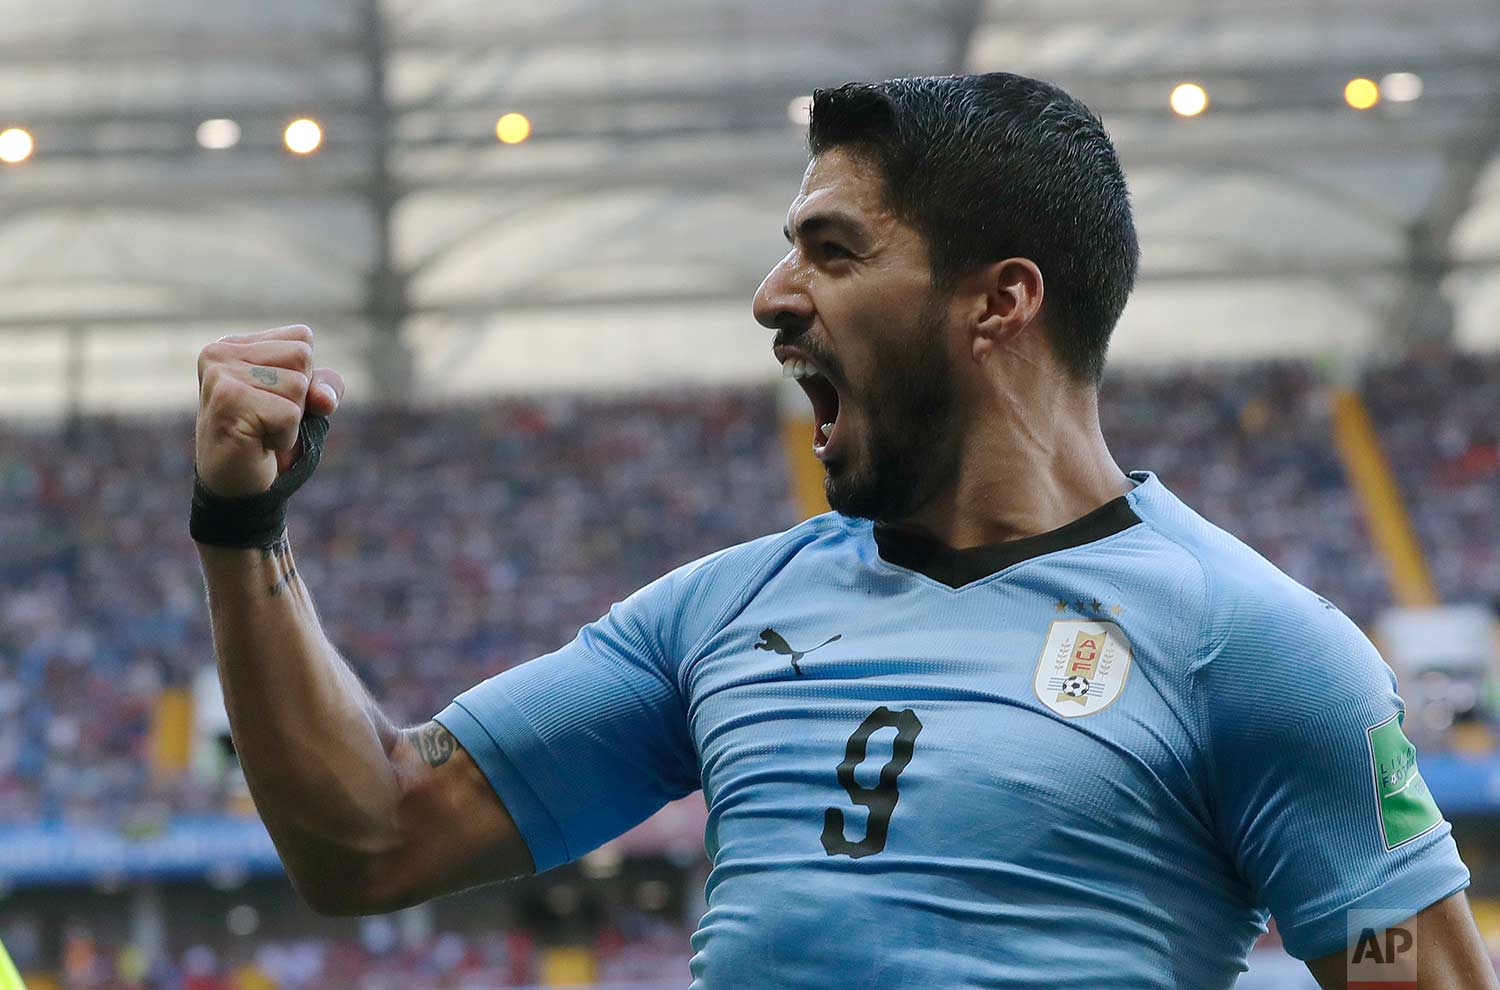  Uruguay's Luis Suarez celebrates scoring his side's first goal during the group A match against Saudi Arabia at the 2018 soccer World Cup in Rostov Arena in Rostov-on-Don, Russia, Wednesday, June 20, 2018. (AP Photo/Andrew Medichini) 